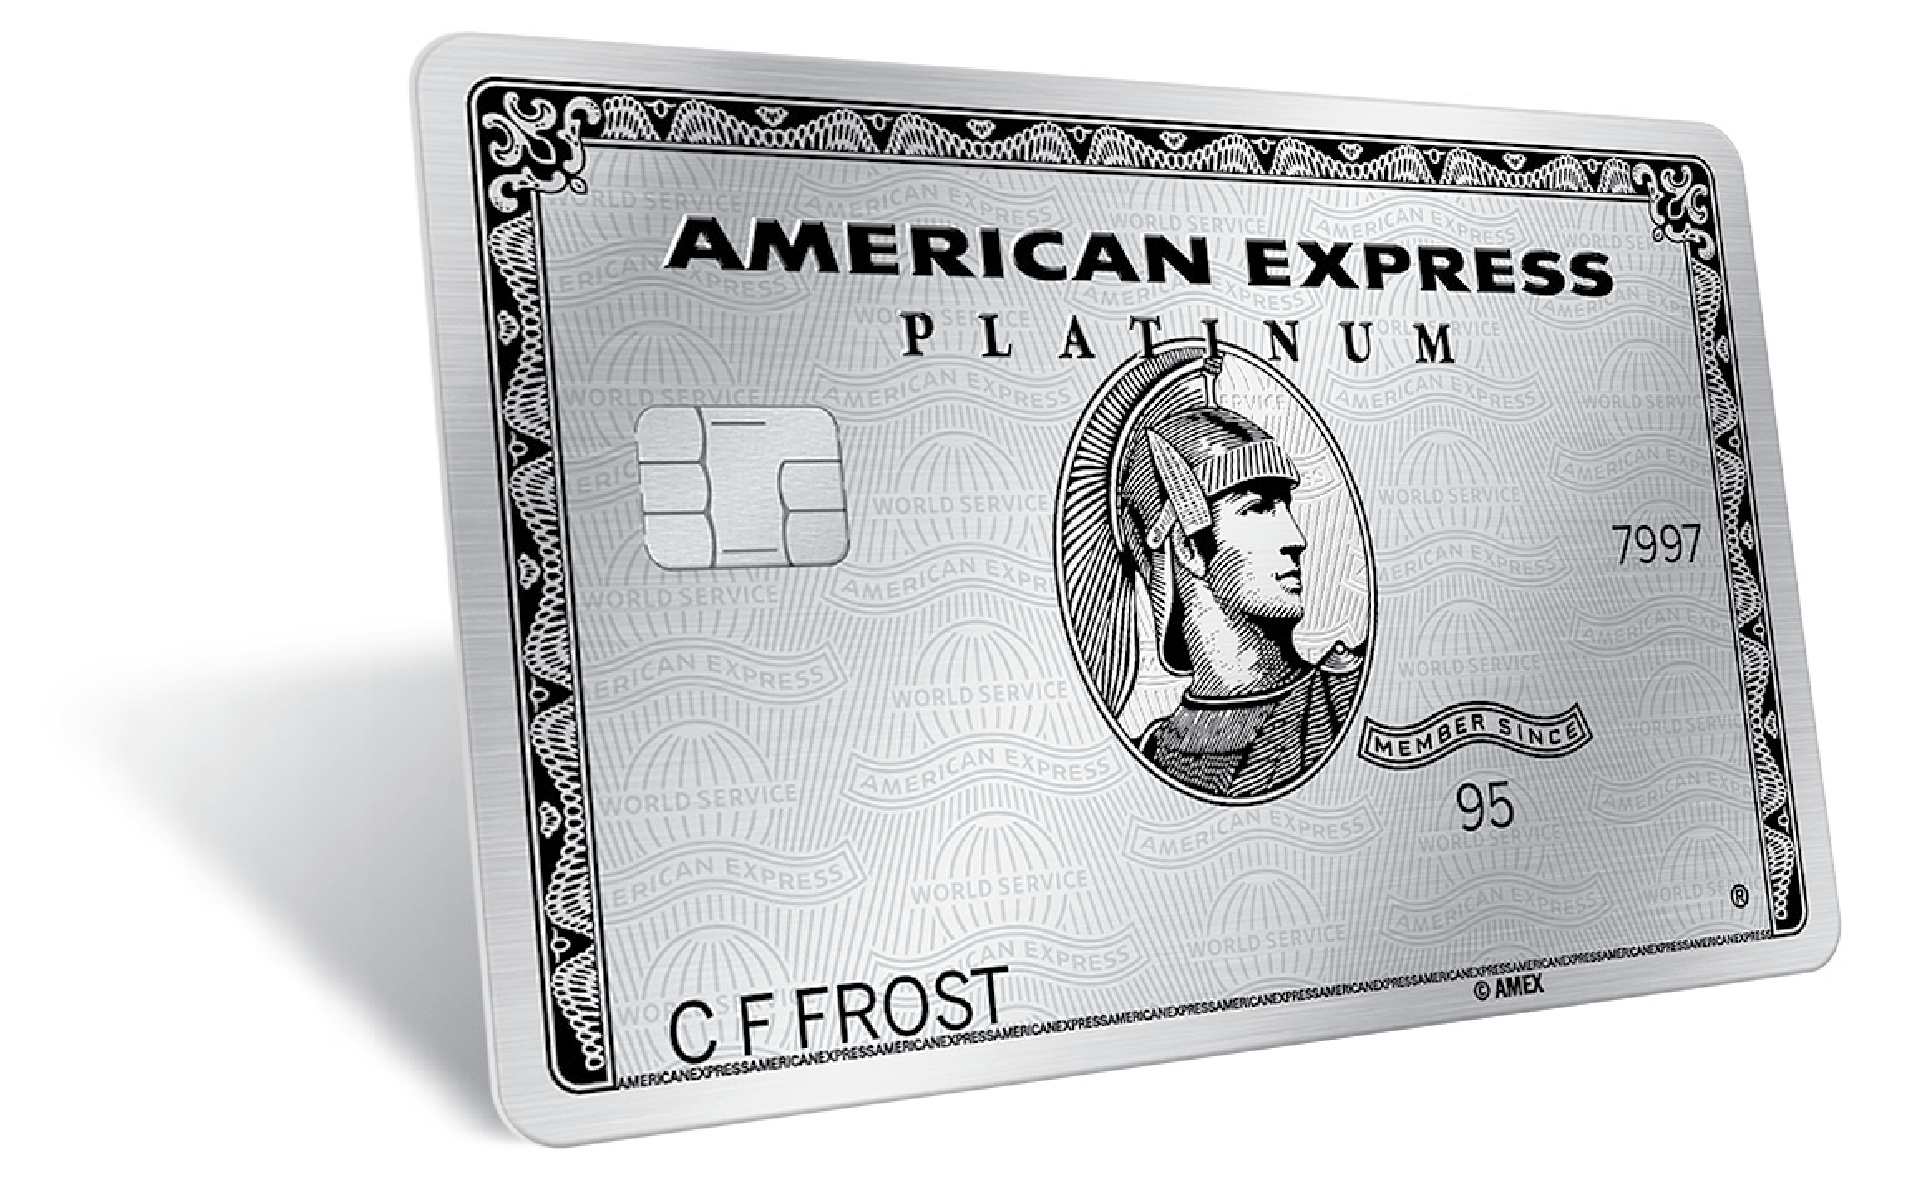 2. American Express - Credit Cards, Rewards, Travel and Business Services - wide 1